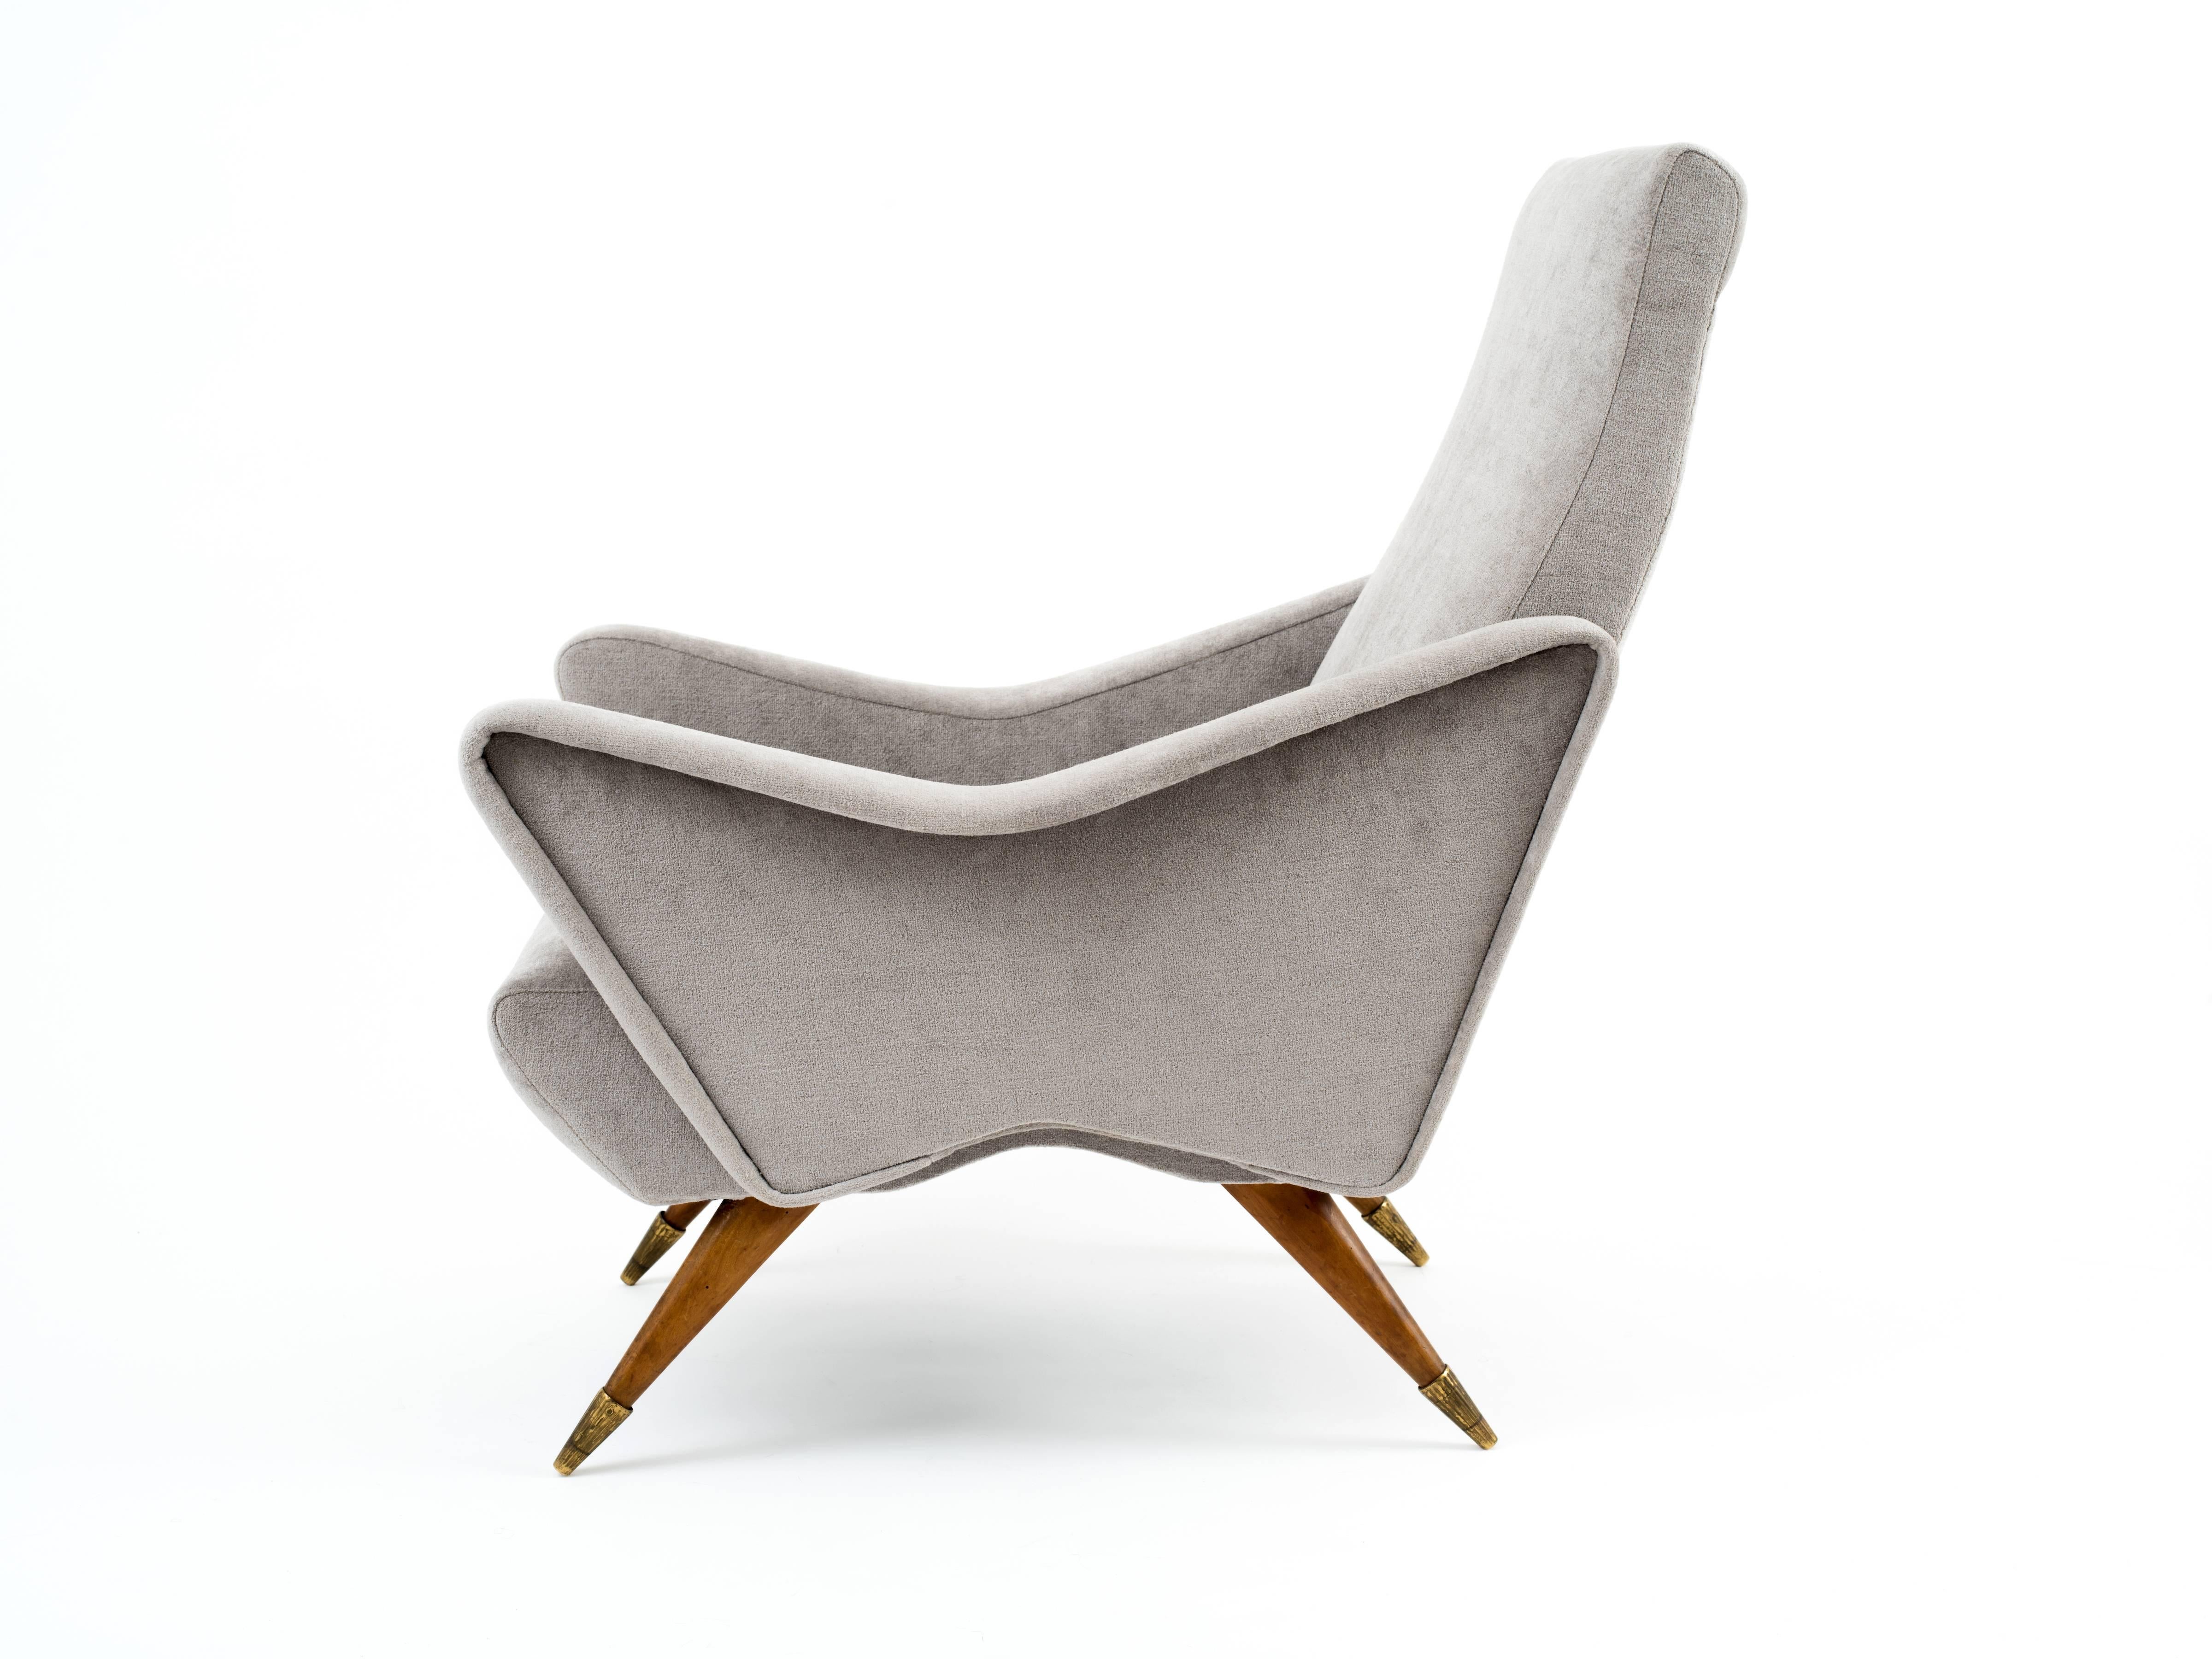 A pair of Italian mid century lounge chairs with dynamic-yet-elegant profiles. Fruitwood legs and fluted, solid brass sabots with rich patina add an organic flare and contrast beautifully against the cloud-gray, textured cotton upholstery. A rare